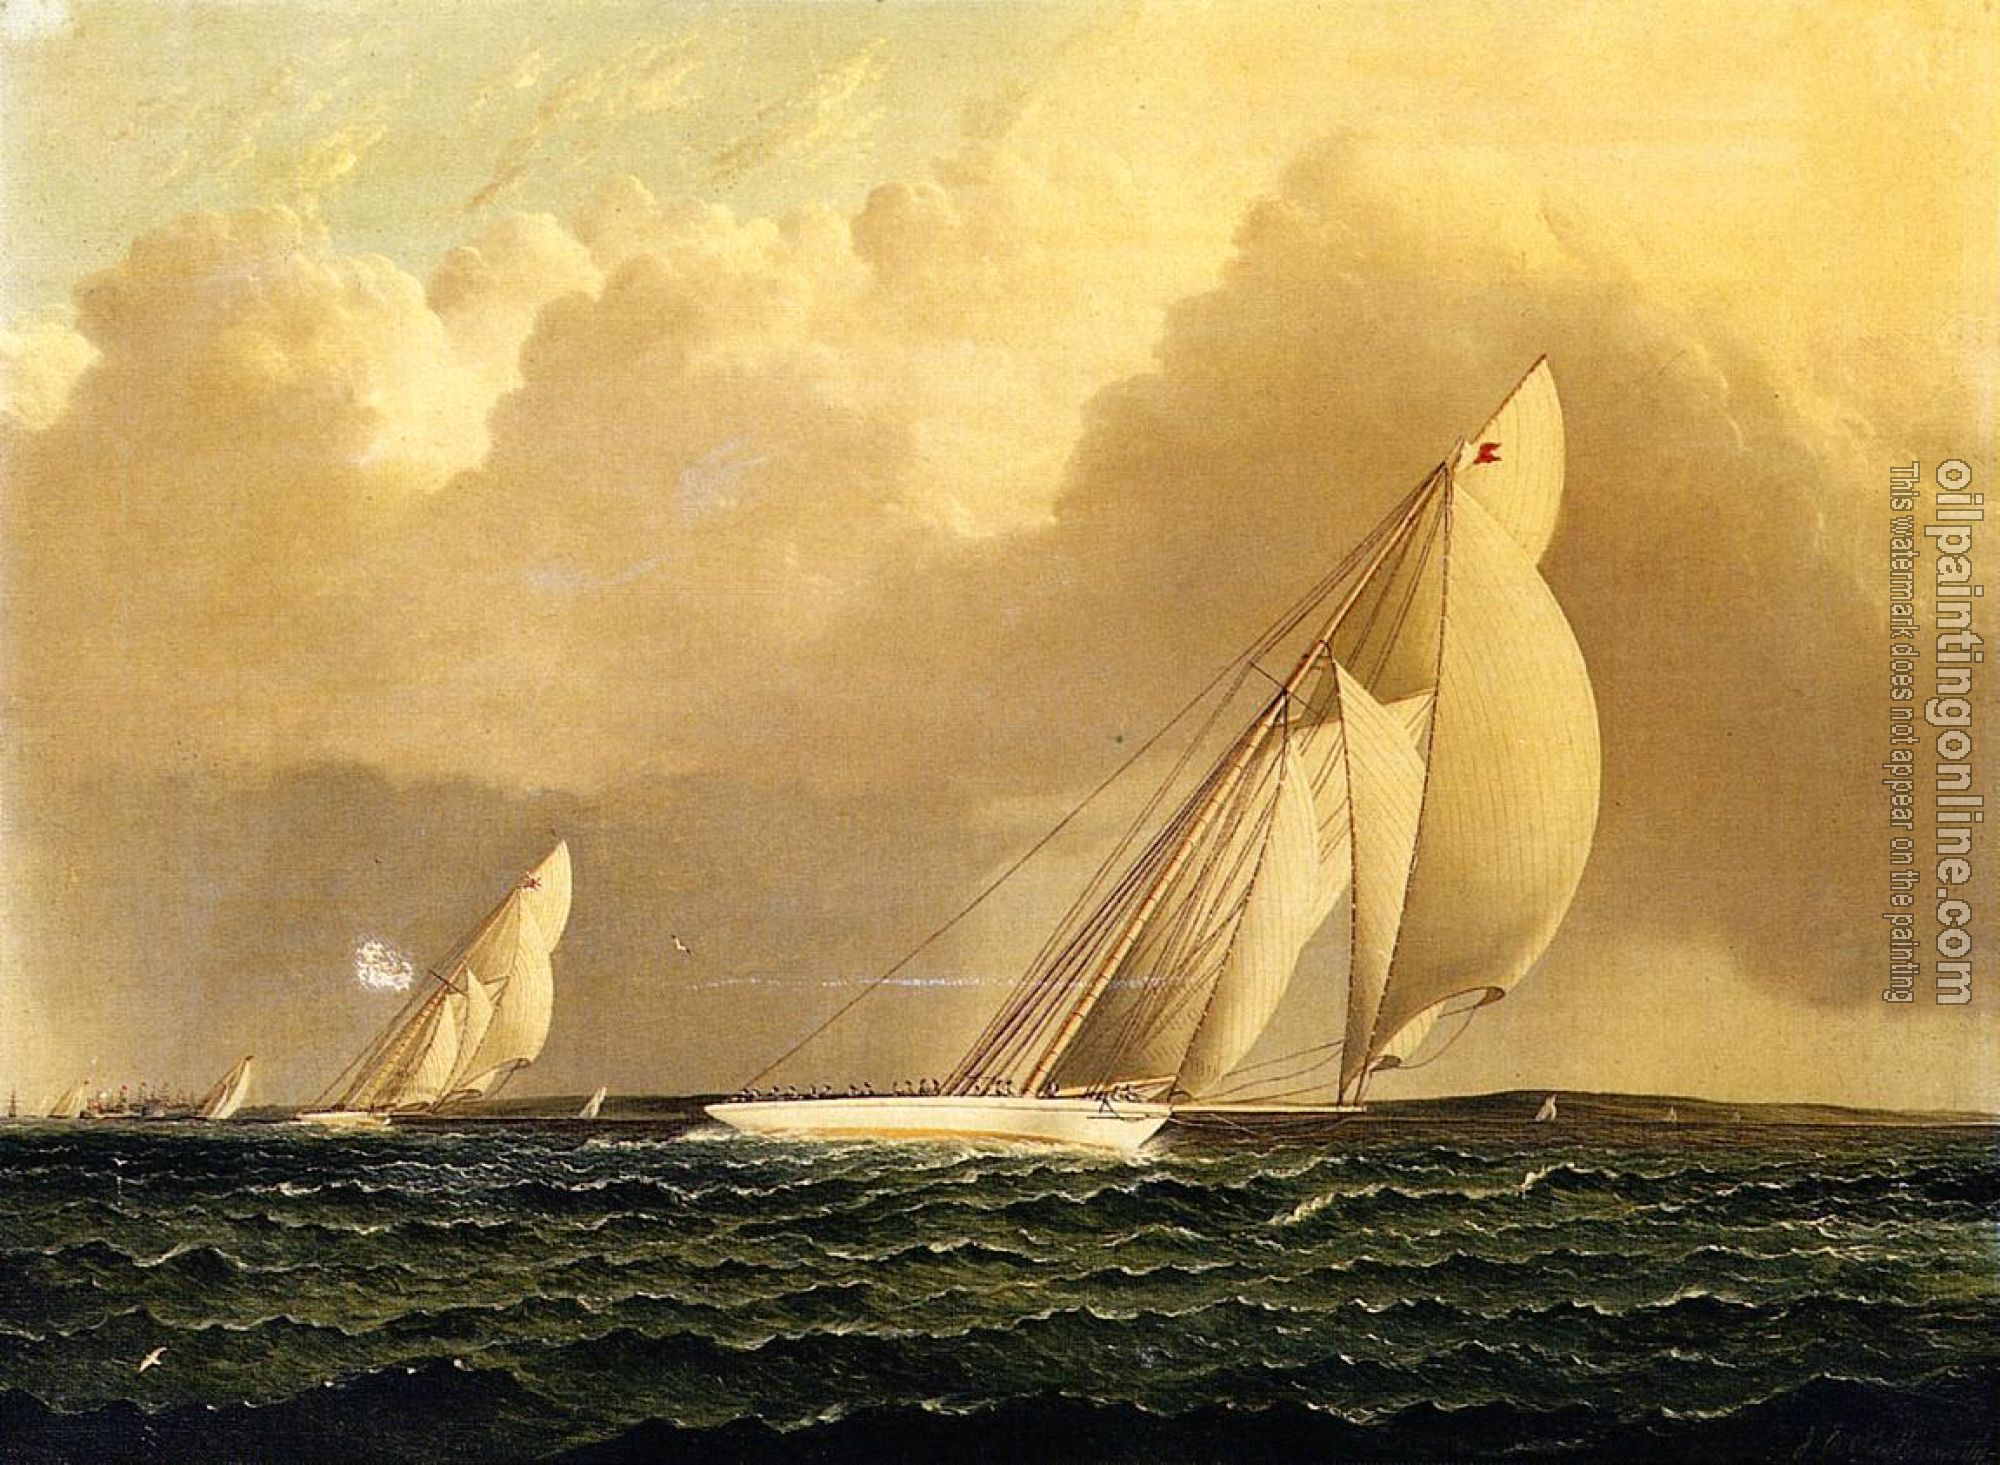 James E Buttersworth - Yacht Race in New York Harbor